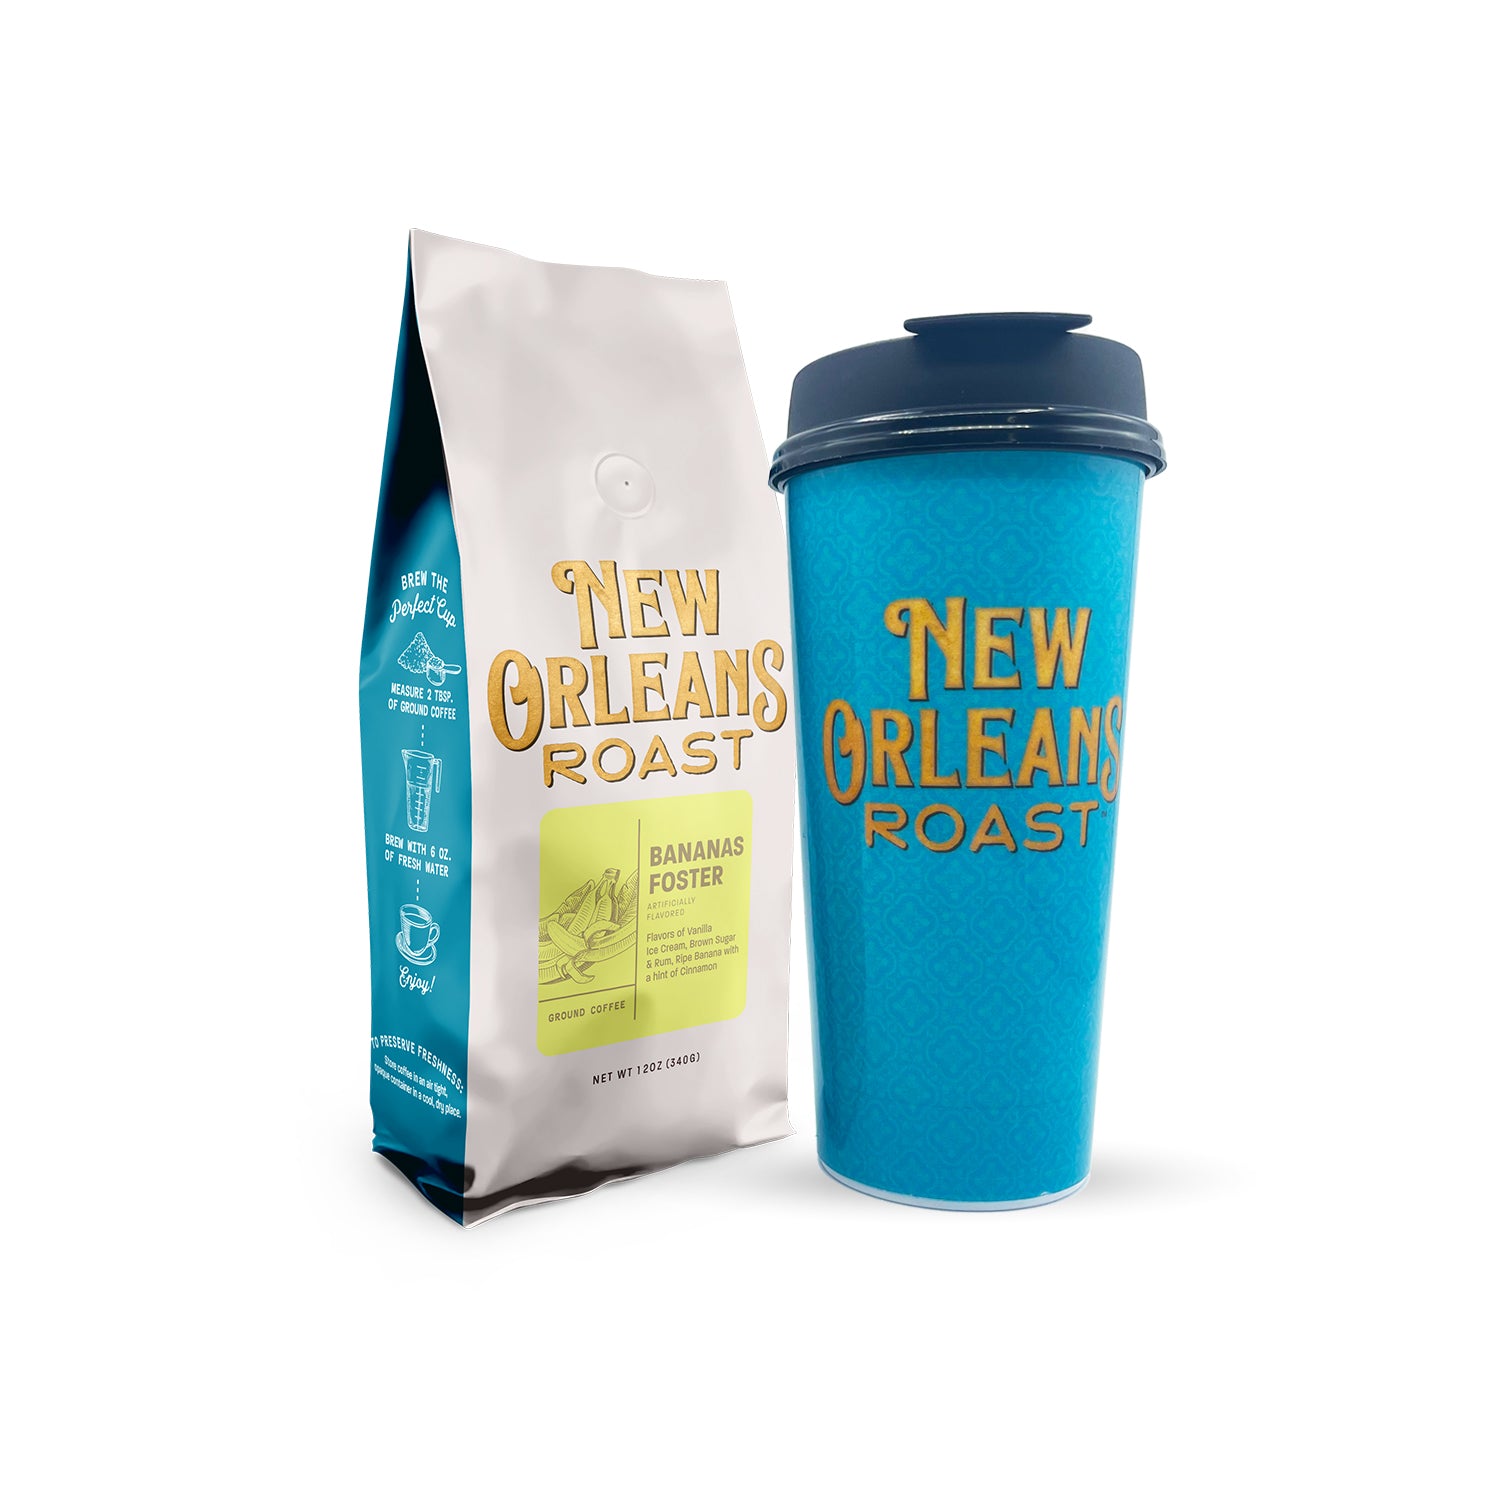 Choose Your Coffee Bag Gift Set – New Orleans Roast